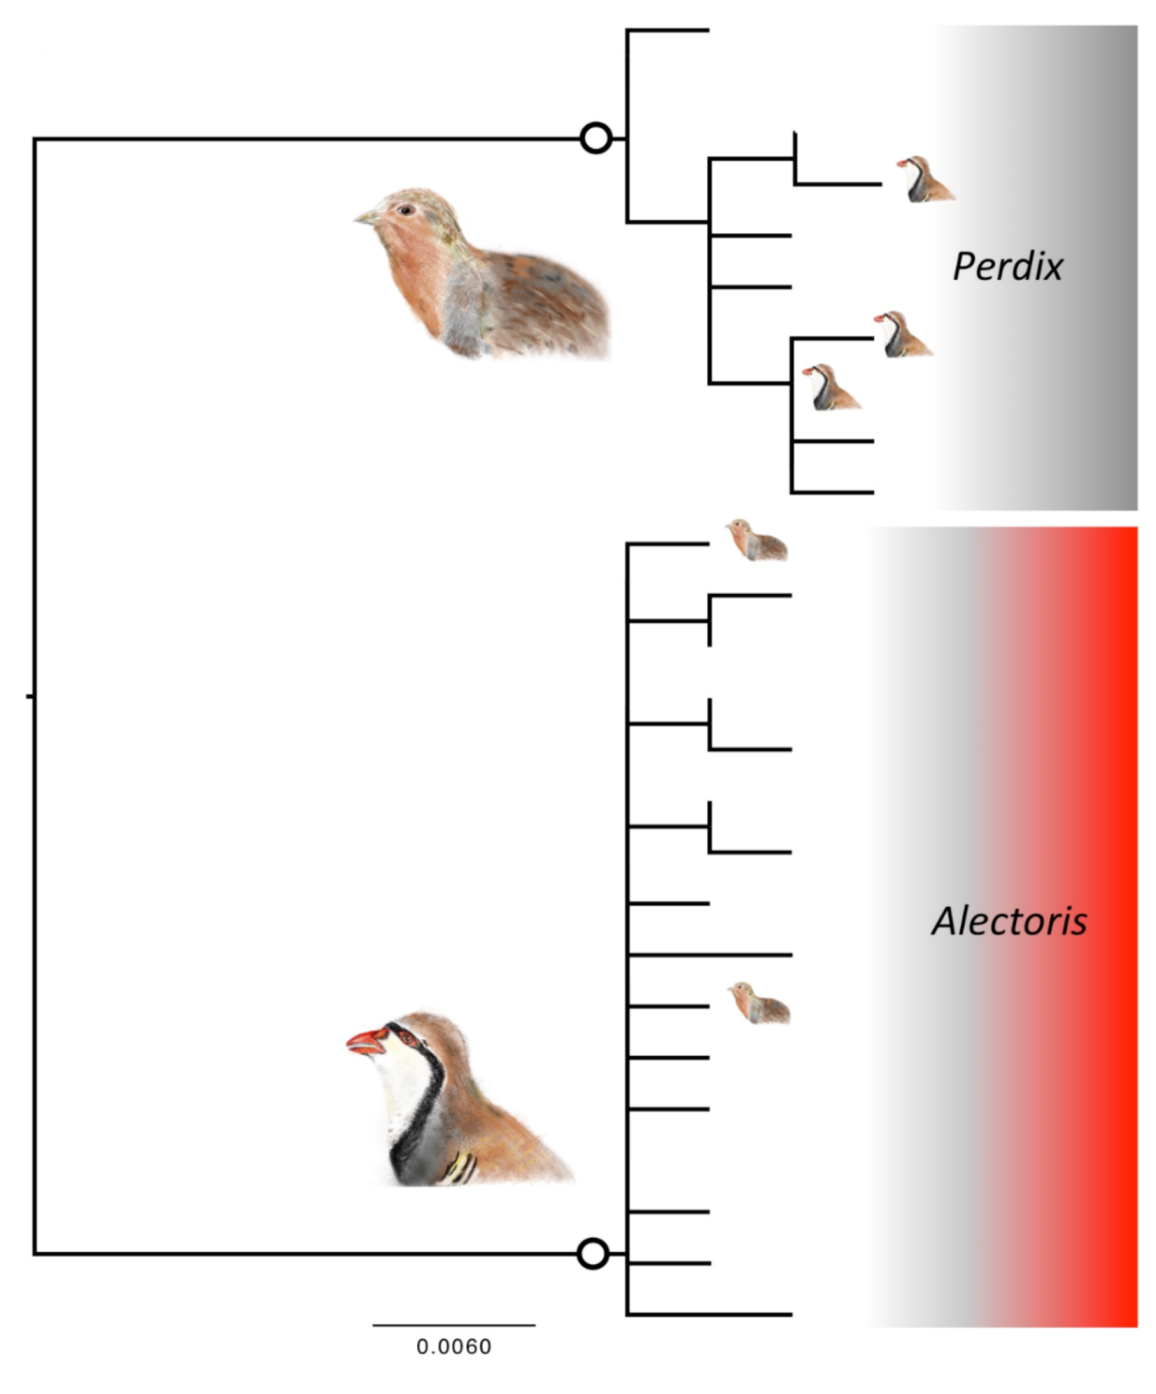 Animals | Free Full-Text | Mismatches between Morphology and DNA in Italian  Partridges May Not Be Explained Only by Recent Artificial Release of  Farm-Reared Birds